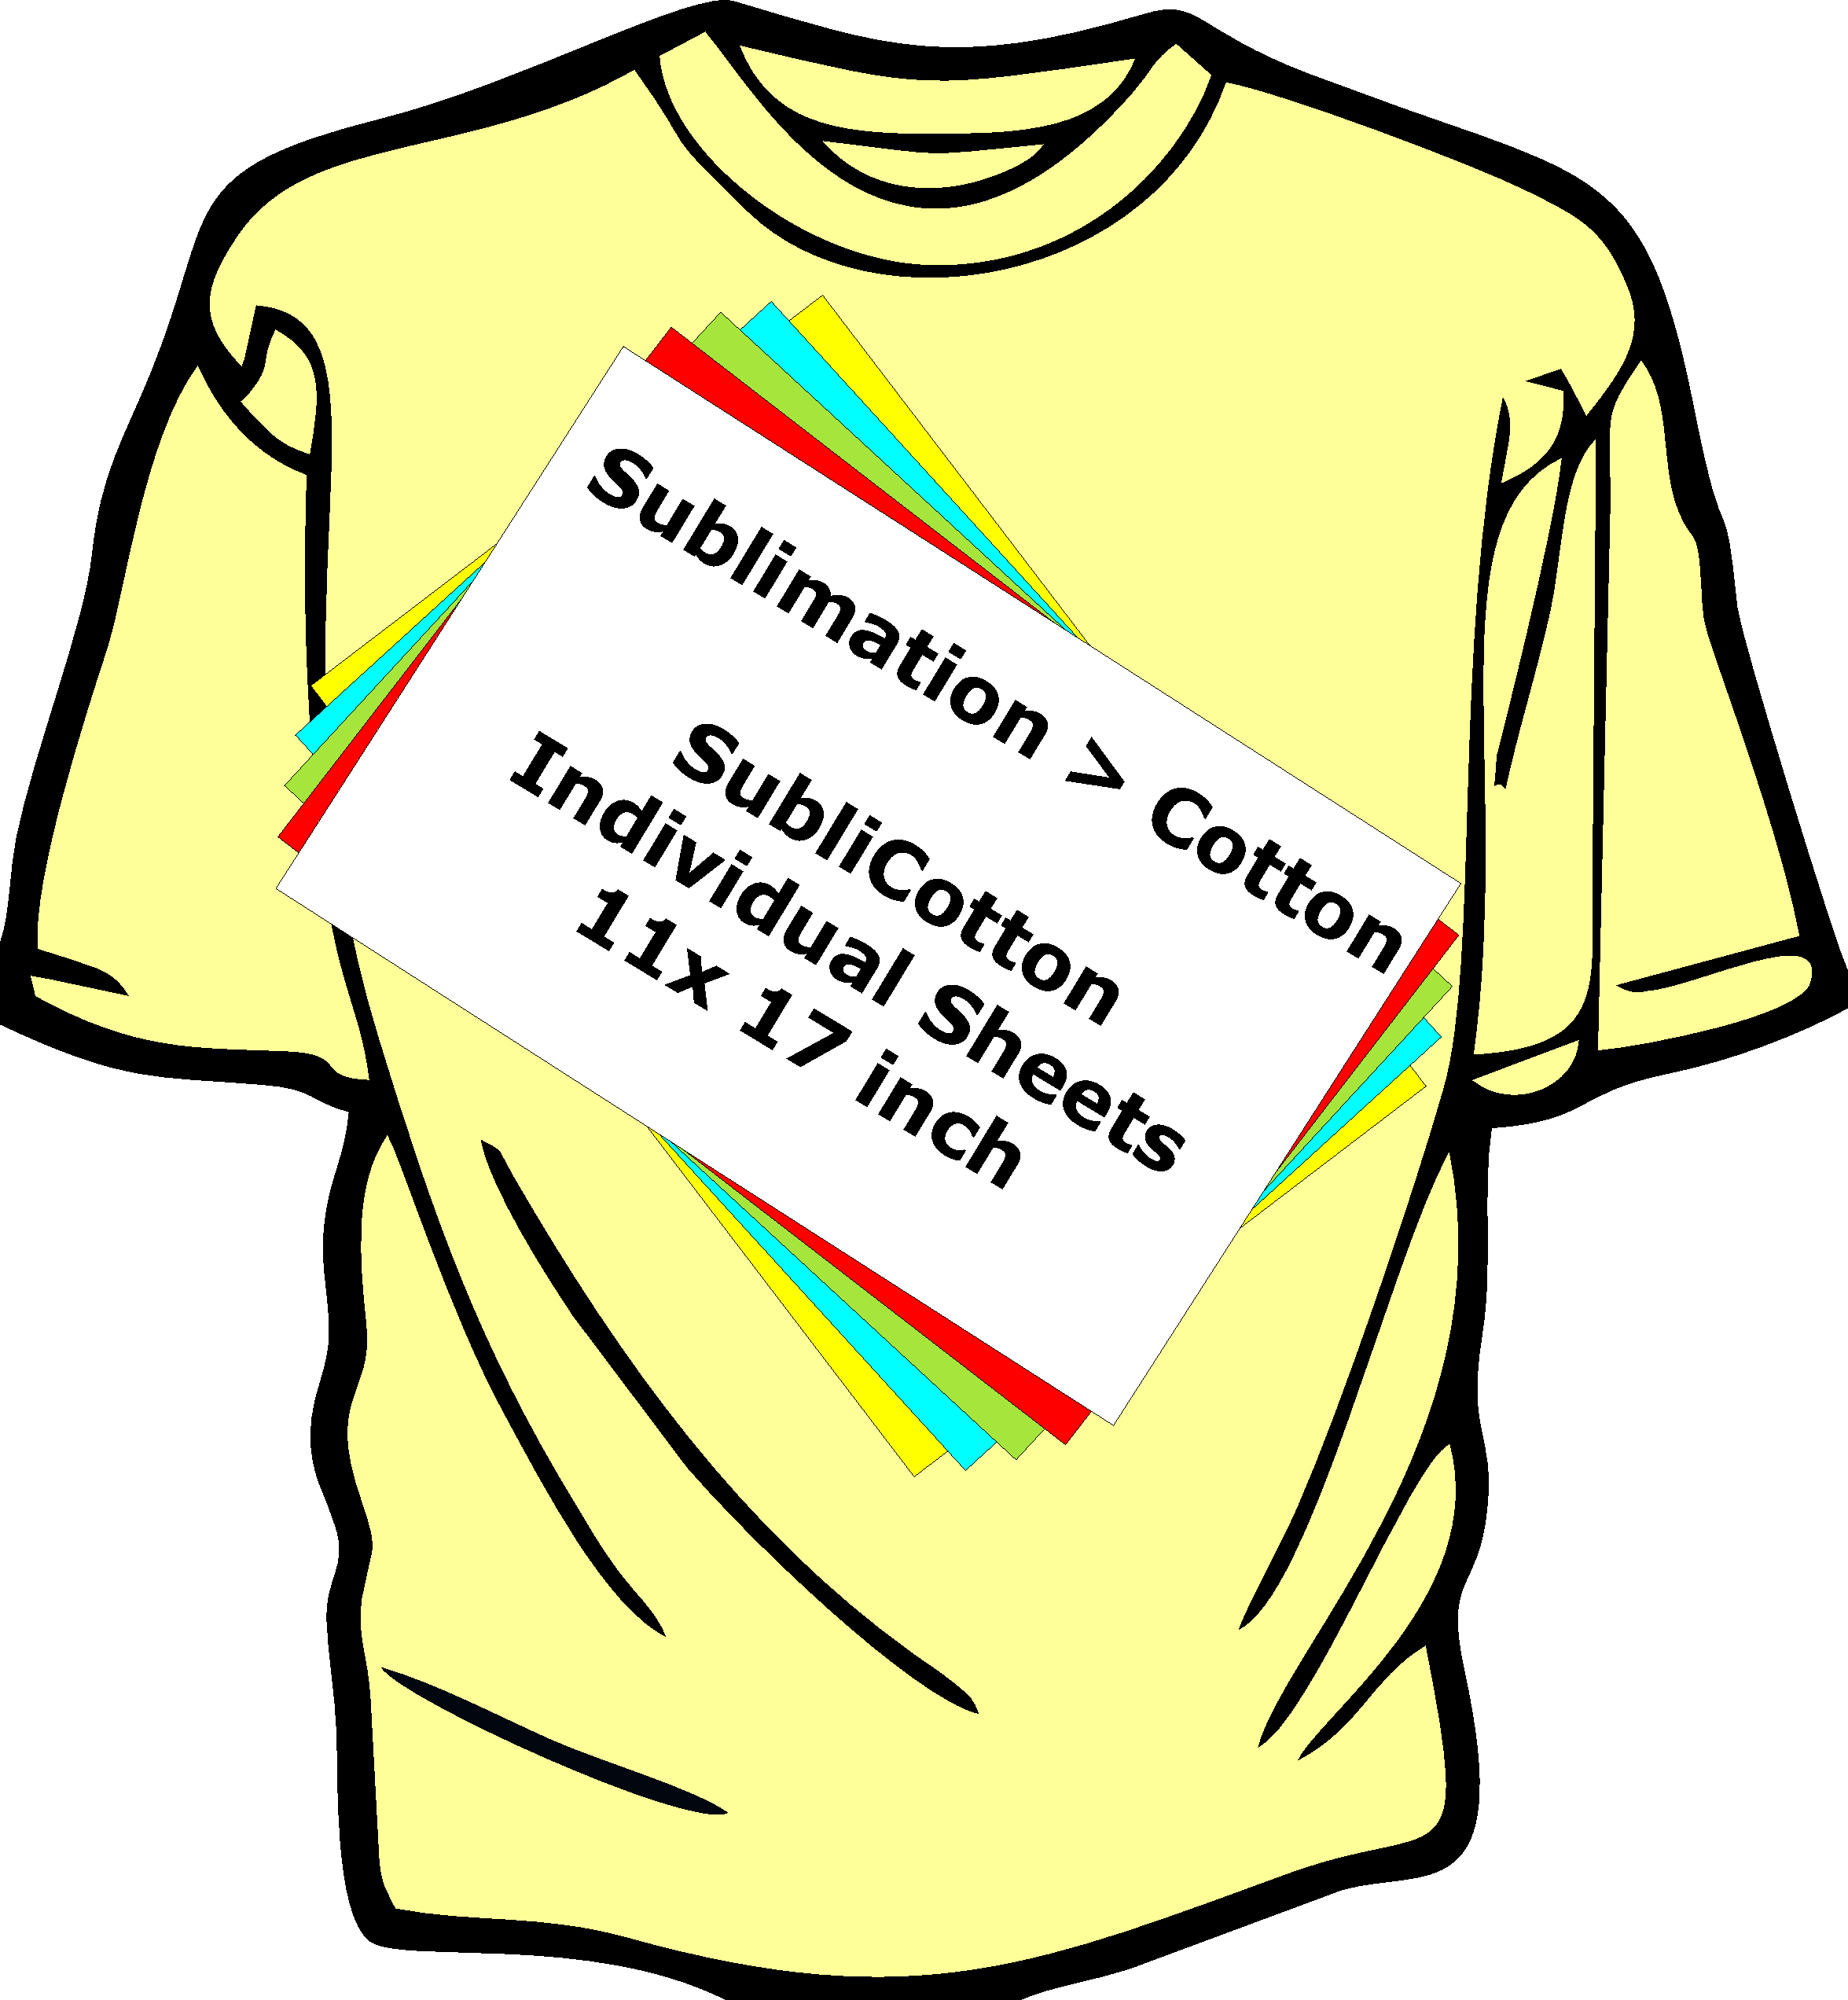 SUBLIMATION TO COTTON - INDIVIDUAL SUBLICOTTON SHEETS